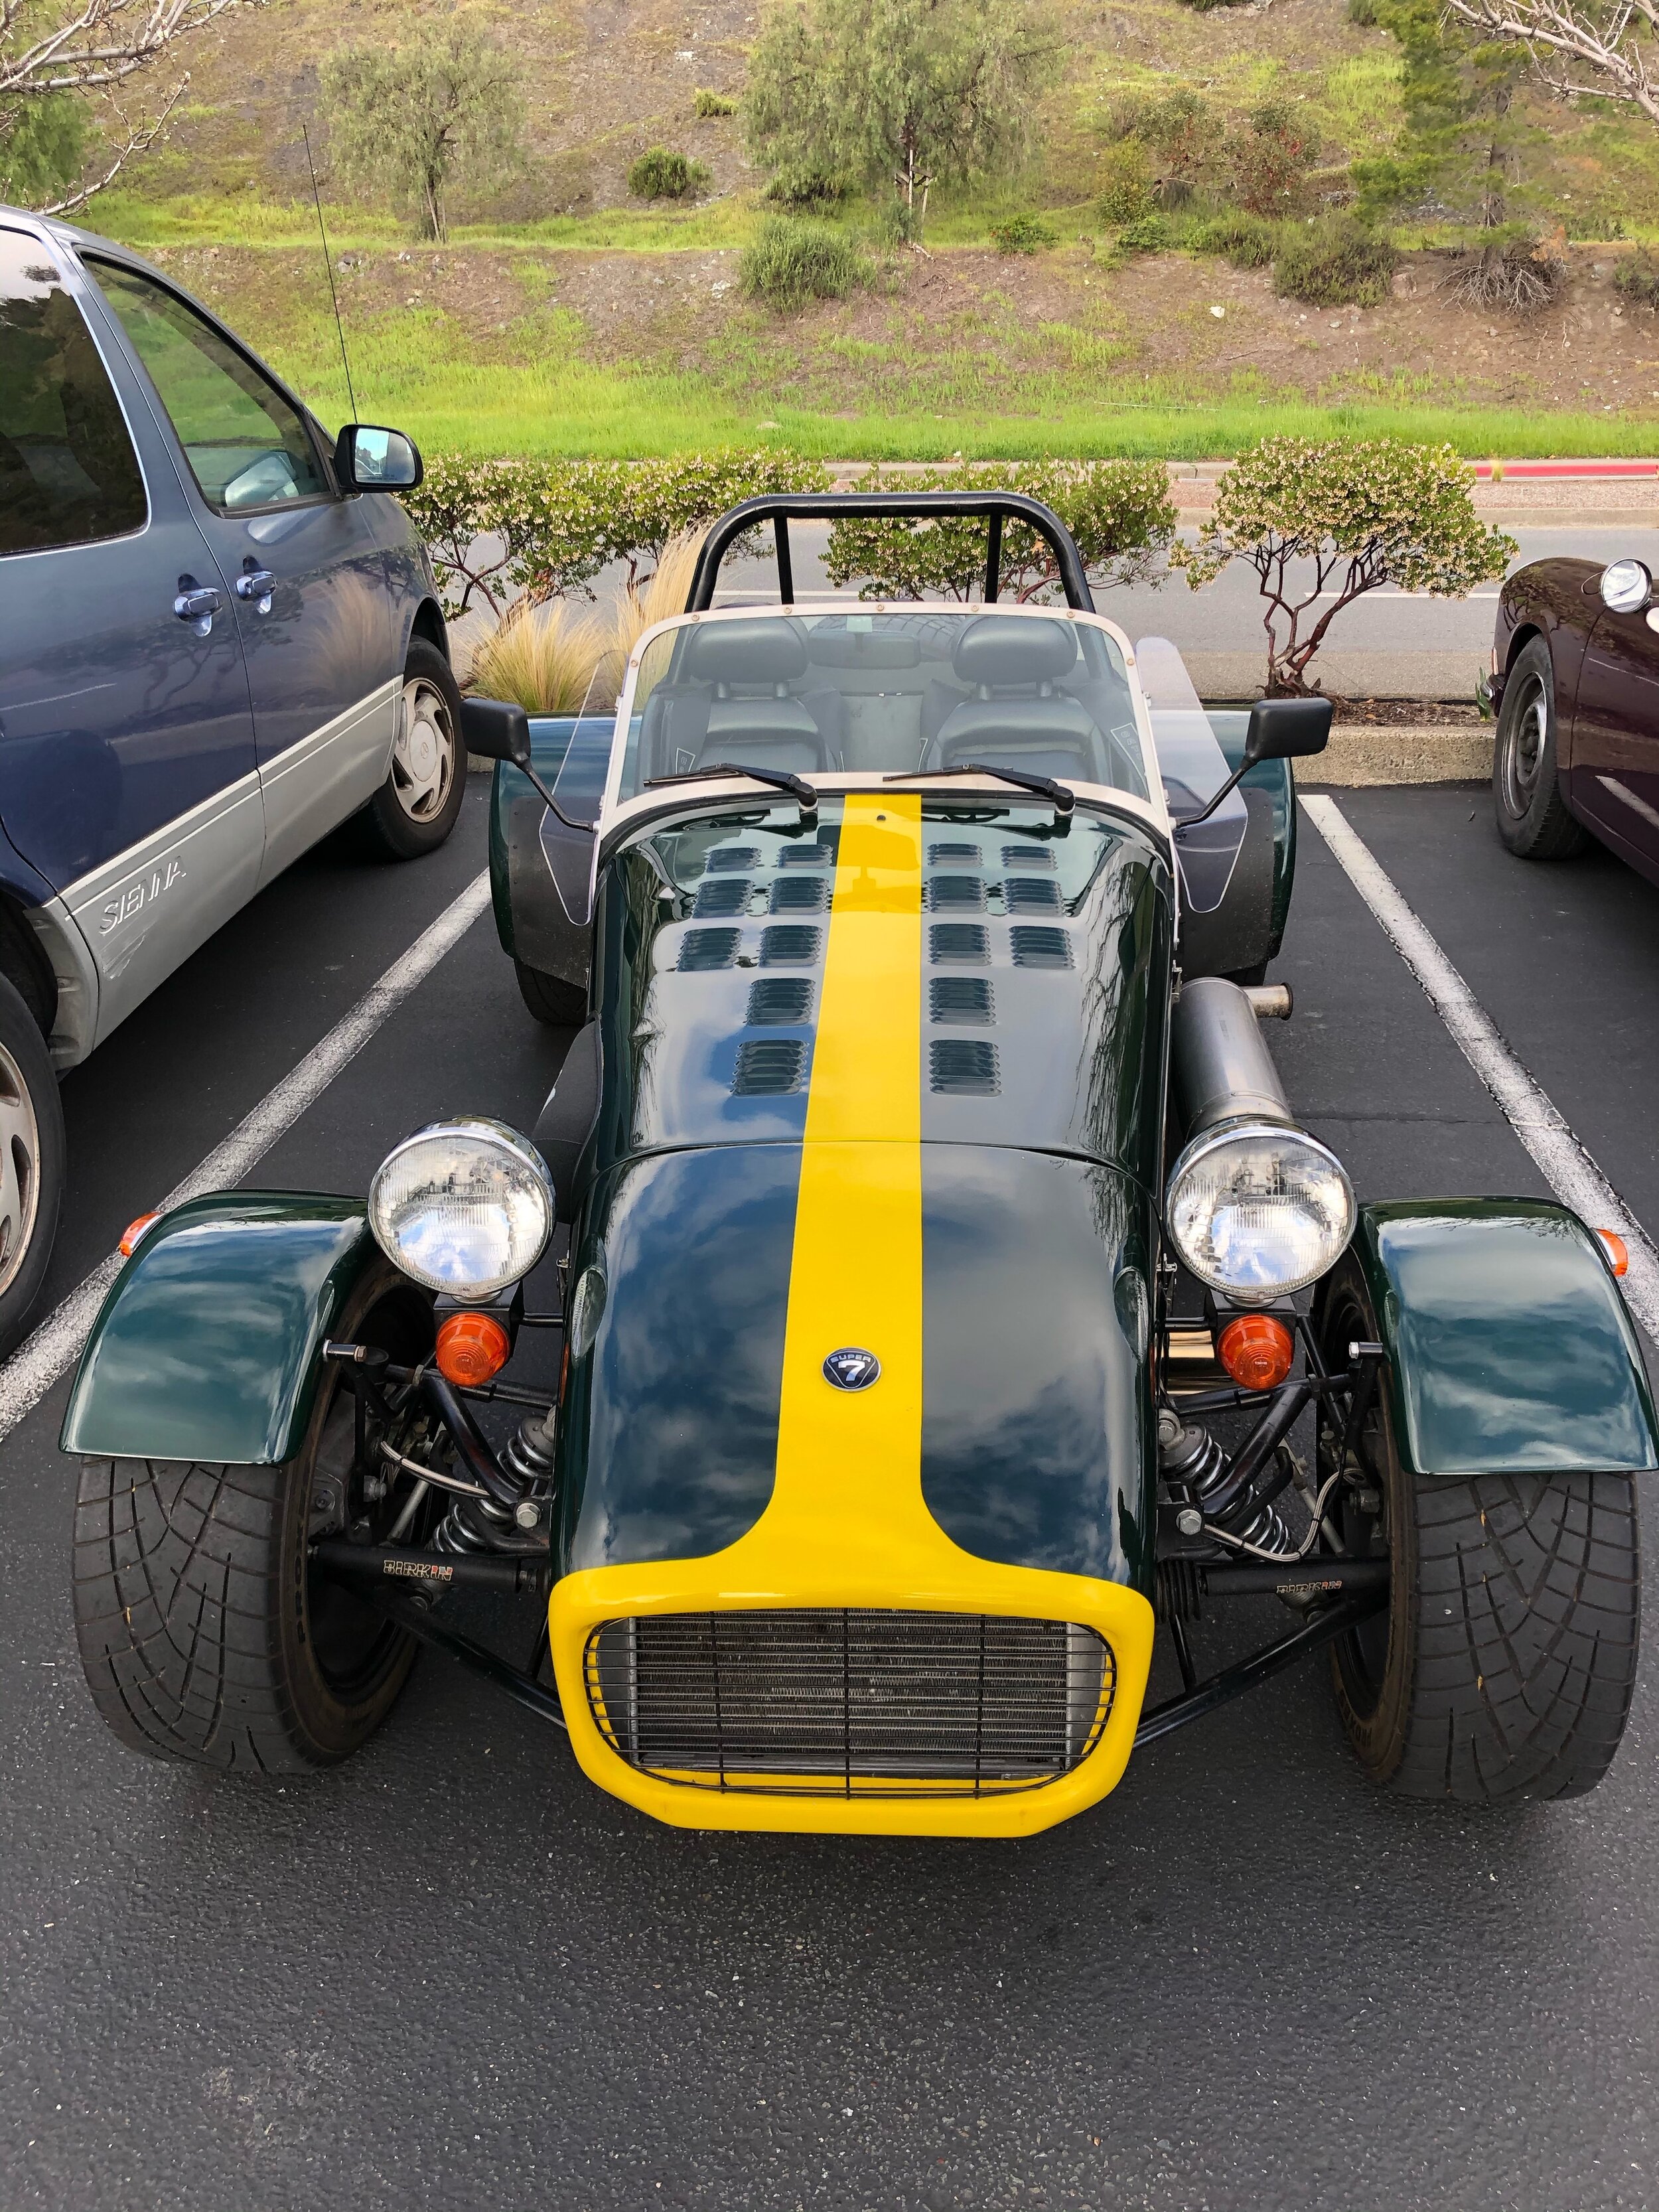 One of my Old Spokes bicycle buddies once had one of these Lotus'.  He still lusts after it.